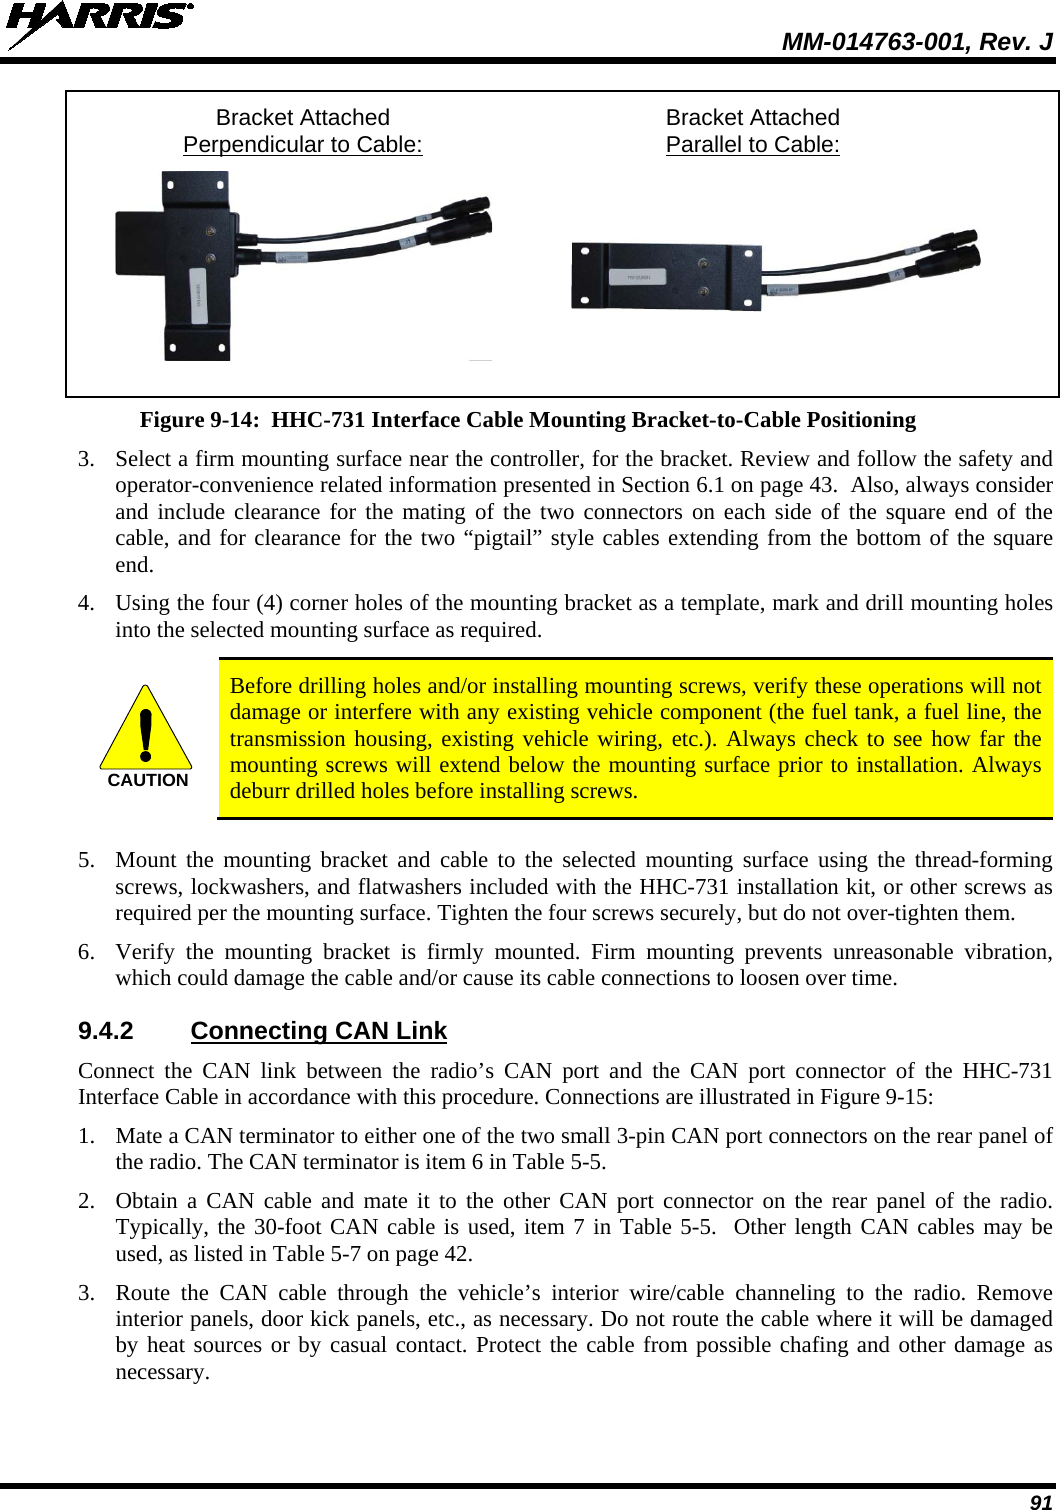  MM-014763-001, Rev. J 91  Bracket Attached Bracket Attached   Perpendicular to Cable:  Parallel to Cable:     Figure 9-14:  HHC-731 Interface Cable Mounting Bracket-to-Cable Positioning 3. Select a firm mounting surface near the controller, for the bracket. Review and follow the safety and operator-convenience related information presented in Section 6.1 on page 43.  Also, always consider and include clearance for the mating of the two connectors on each side of the square end of the cable, and for clearance for the two “pigtail” style cables extending from the bottom of the square end. 4. Using the four (4) corner holes of the mounting bracket as a template, mark and drill mounting holes into the selected mounting surface as required.   Before drilling holes and/or installing mounting screws, verify these operations will not damage or interfere with any existing vehicle component (the fuel tank, a fuel line, the transmission housing, existing vehicle wiring, etc.). Always check to see how far the mounting screws will extend below the mounting surface prior to installation. Always deburr drilled holes before installing screws.  5. Mount the mounting bracket and cable to the selected mounting surface using the thread-forming screws, lockwashers, and flatwashers included with the HHC-731 installation kit, or other screws as required per the mounting surface. Tighten the four screws securely, but do not over-tighten them. 6. Verify the mounting  bracket is firmly mounted. Firm mounting prevents unreasonable vibration, which could damage the cable and/or cause its cable connections to loosen over time. 9.4.2 Connecting CAN Link Connect the CAN link between the radio’s CAN port and the CAN port connector of the HHC-731 Interface Cable in accordance with this procedure. Connections are illustrated in Figure 9-15: 1. Mate a CAN terminator to either one of the two small 3-pin CAN port connectors on the rear panel of the radio. The CAN terminator is item 6 in Table 5-5. 2. Obtain a CAN cable and mate it to the other CAN port connector on the rear panel of the radio. Typically, the 30-foot CAN cable is used, item 7 in Table 5-5.  Other length CAN cables may be used, as listed in Table 5-7 on page 42. 3. Route the CAN  cable through the vehicle’s interior wire/cable channeling to the radio. Remove interior panels, door kick panels, etc., as necessary. Do not route the cable where it will be damaged by heat sources or by casual contact. Protect the cable from possible chafing and other damage as necessary.  CAUTION